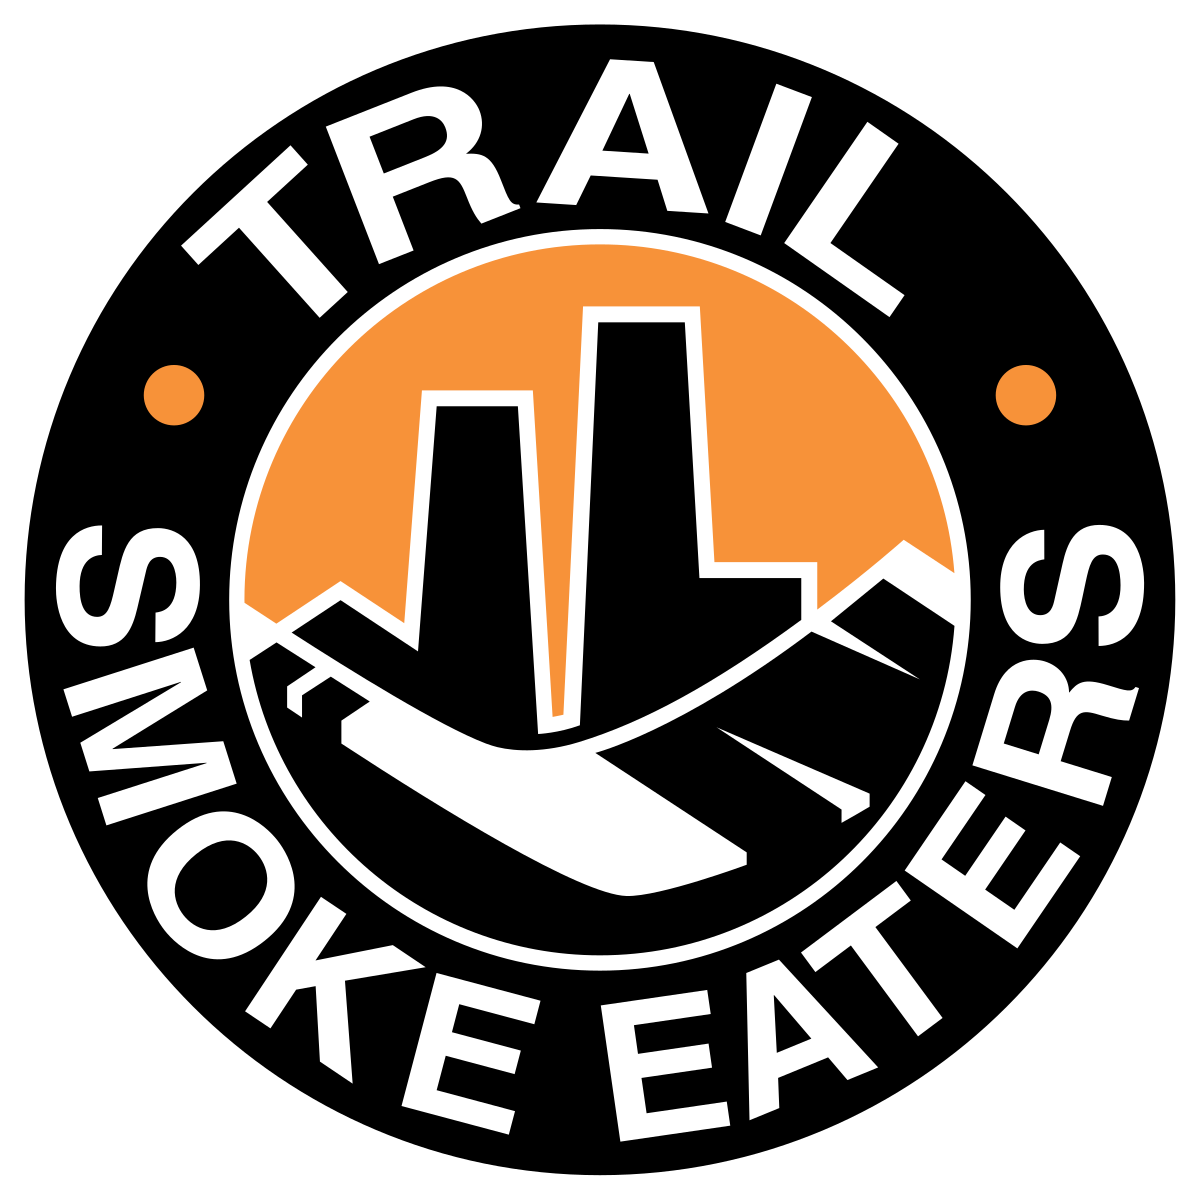 PREVIEW: WARRIORS HEAD TO TRAIL TO TAKE ON SMOKE EATERS